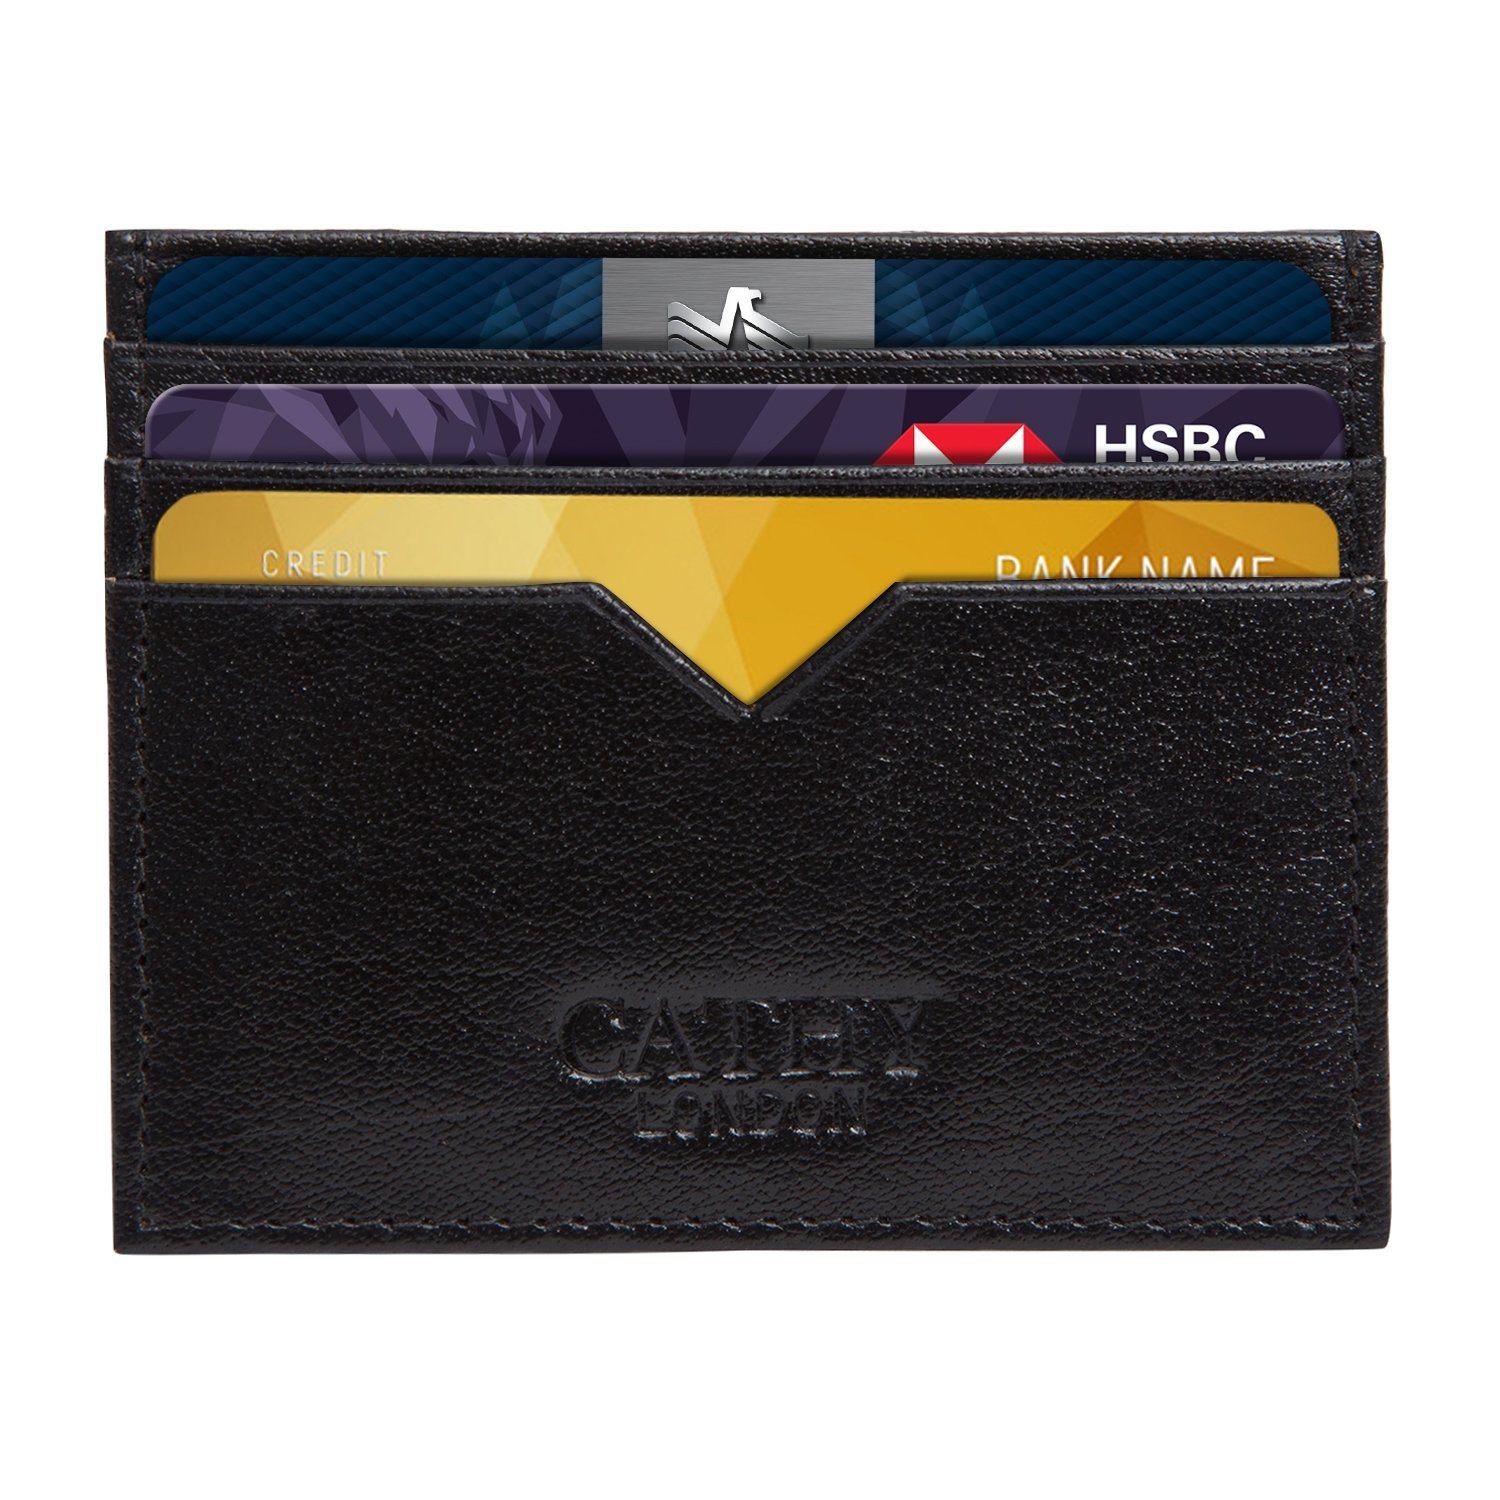 Tan Colour Italian Leather Card Holder/Slim Wallet (6 Card Slots + 1 ID Slot + Cash Compartment) Cathy London 